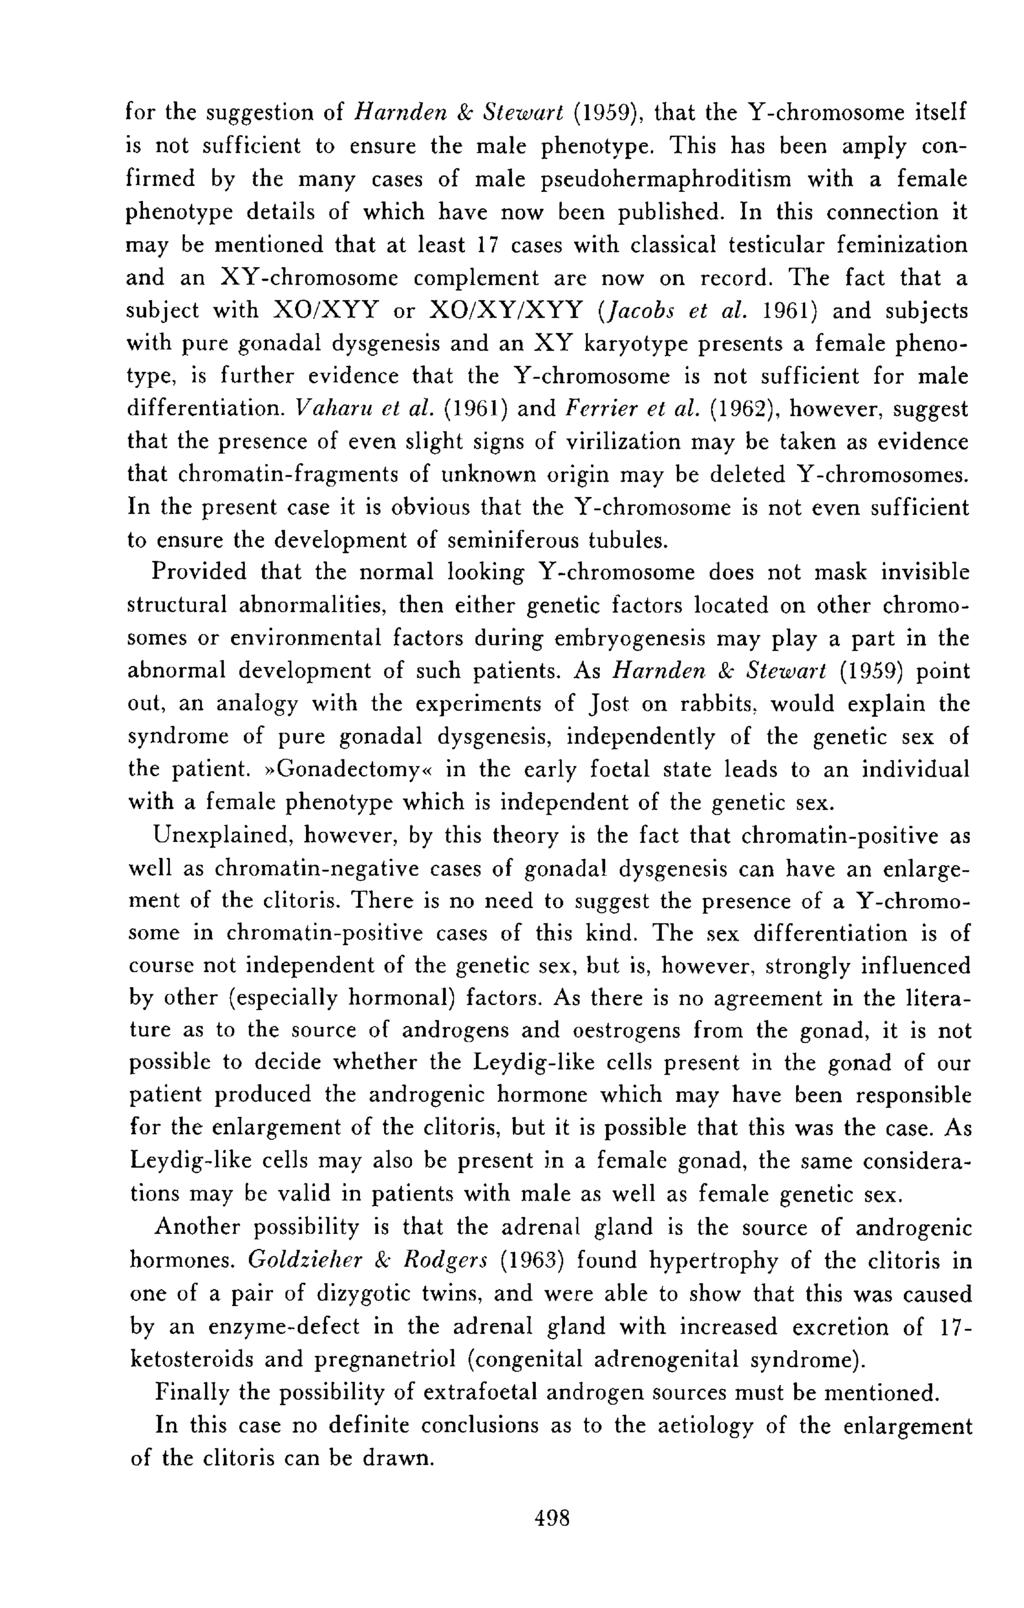 for the suggestion of Harnden 8c Stewart (1959), that the Y-chromosome itself is not sufficient to ensure the male phenotype.